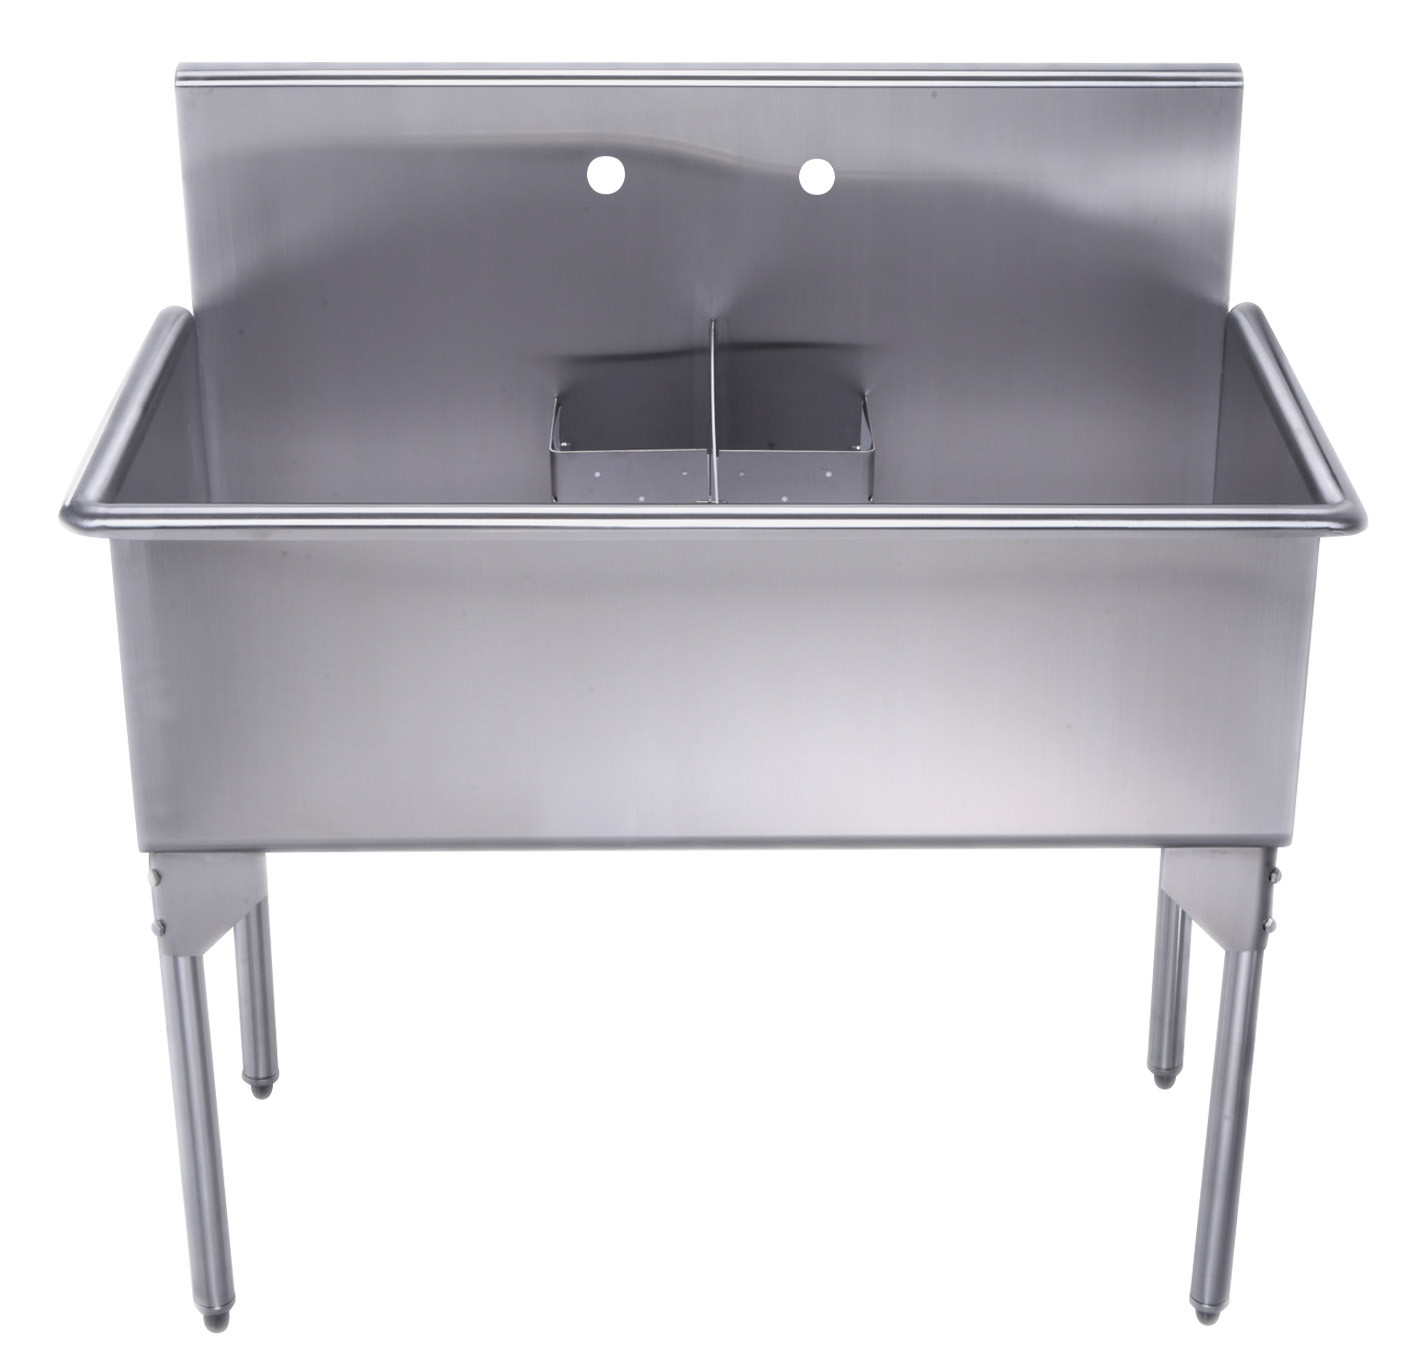 Whitehaus WHLSDB4020-NP 40" Brushed Stainless Steel Two Bowl Utility Sink